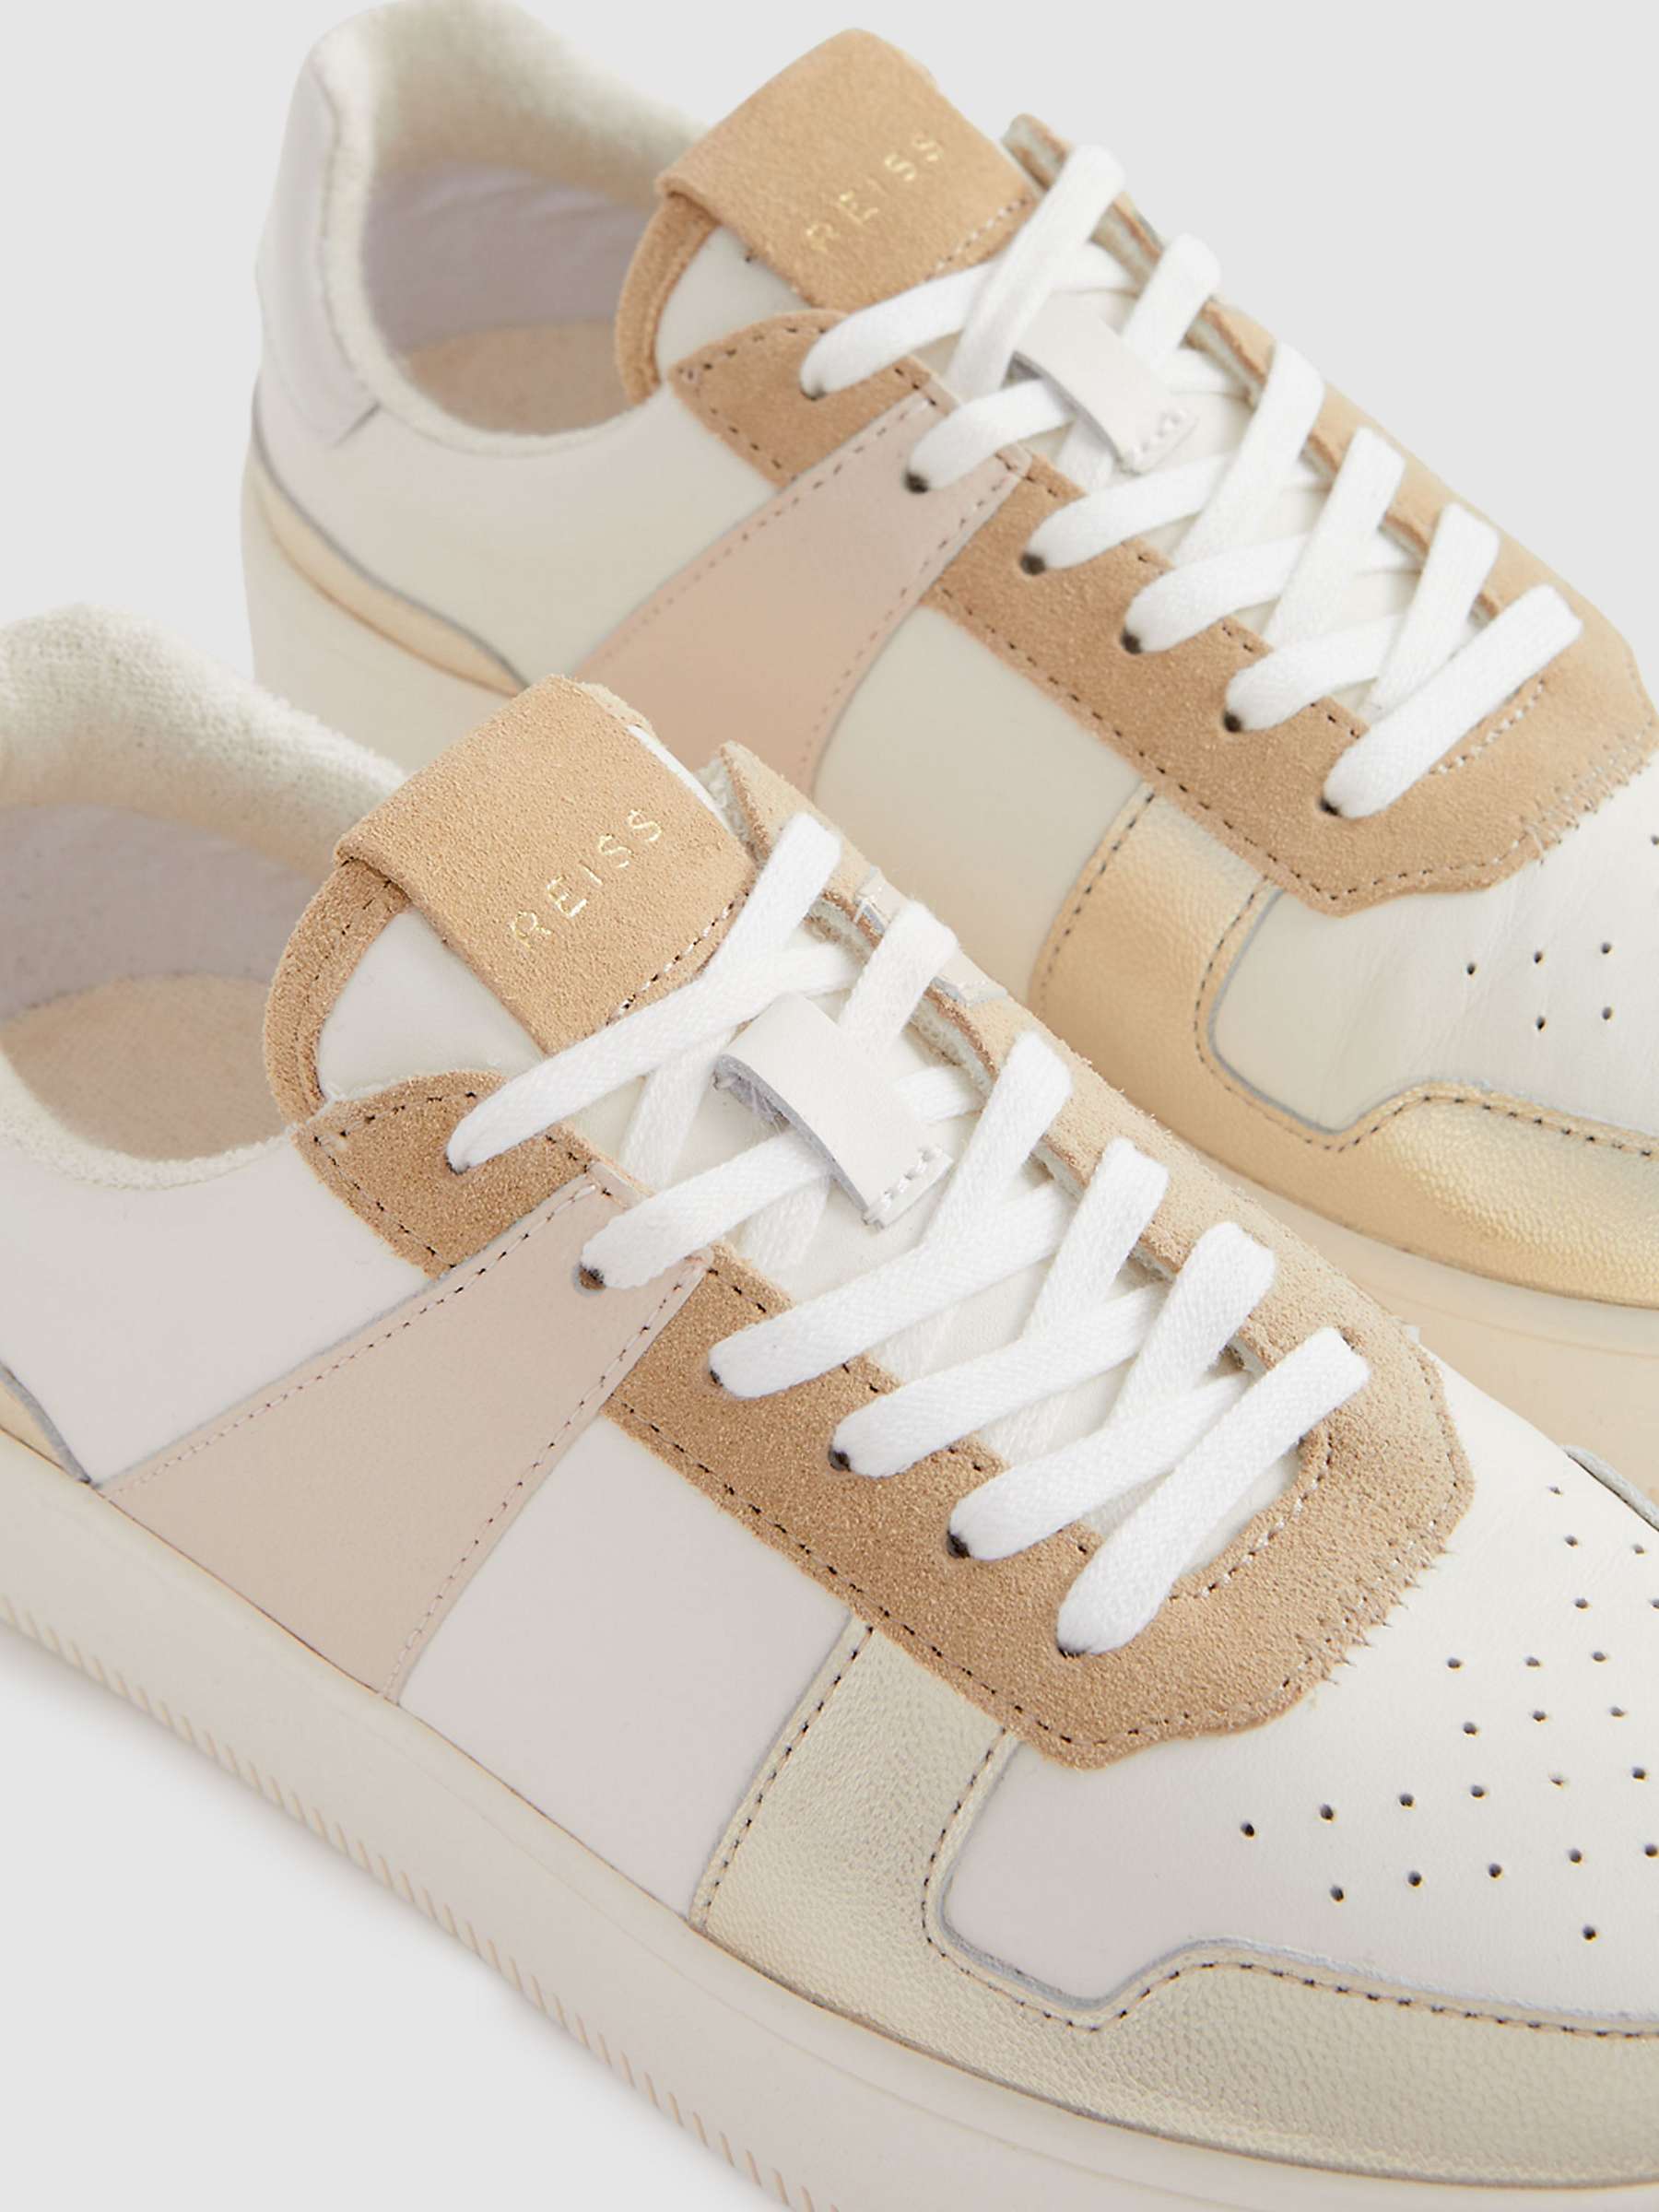 Buy Reiss Aira Colour Block Leather Trainers, White/Multi Online at johnlewis.com